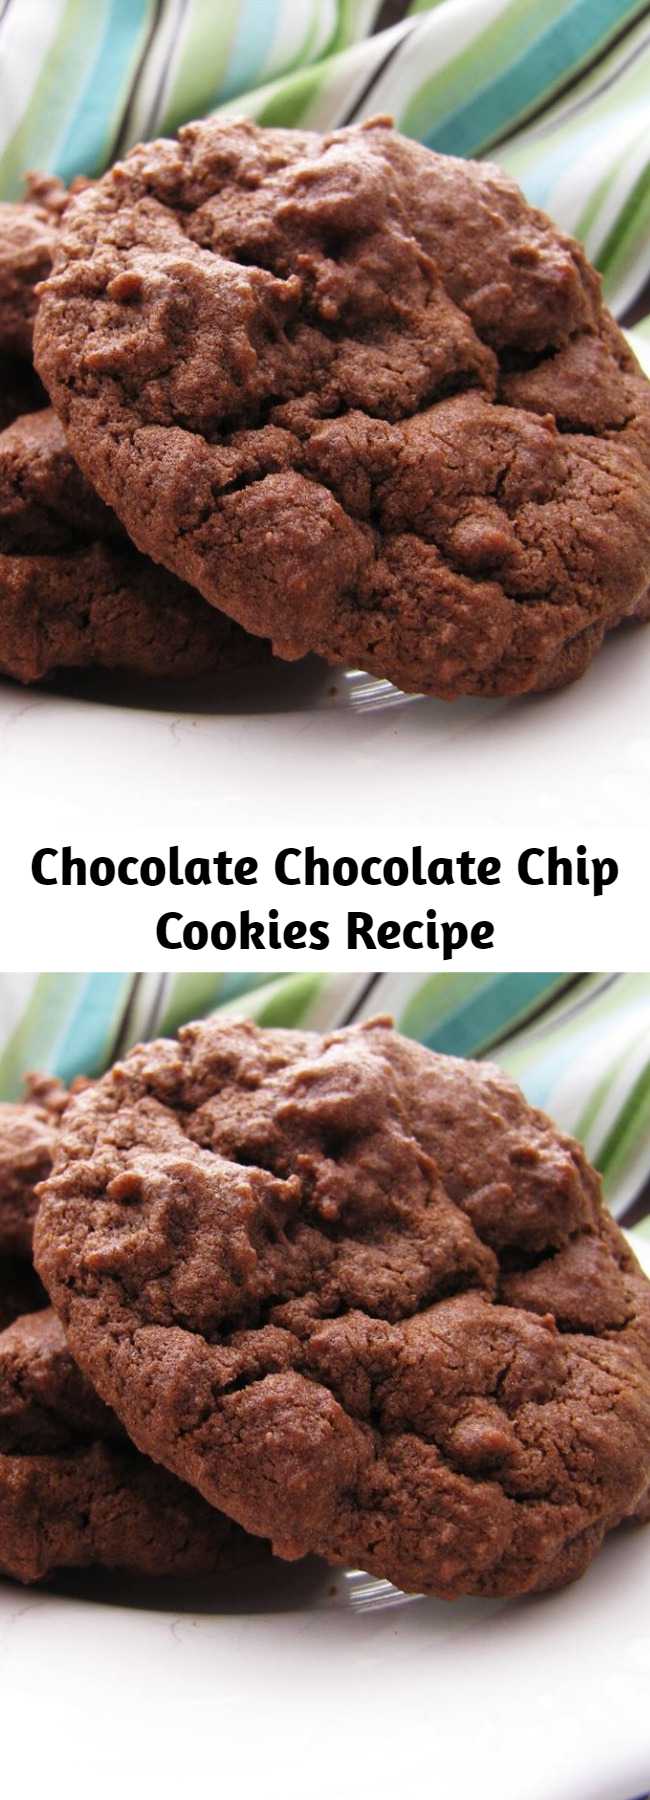 Chocolate Chocolate Chip Cookies Recipe - Deep chocolate flavor, pleasantly (but not overly) sweet, soft texture but not too gooey, perfect height (not flat) and just downright irresistible!